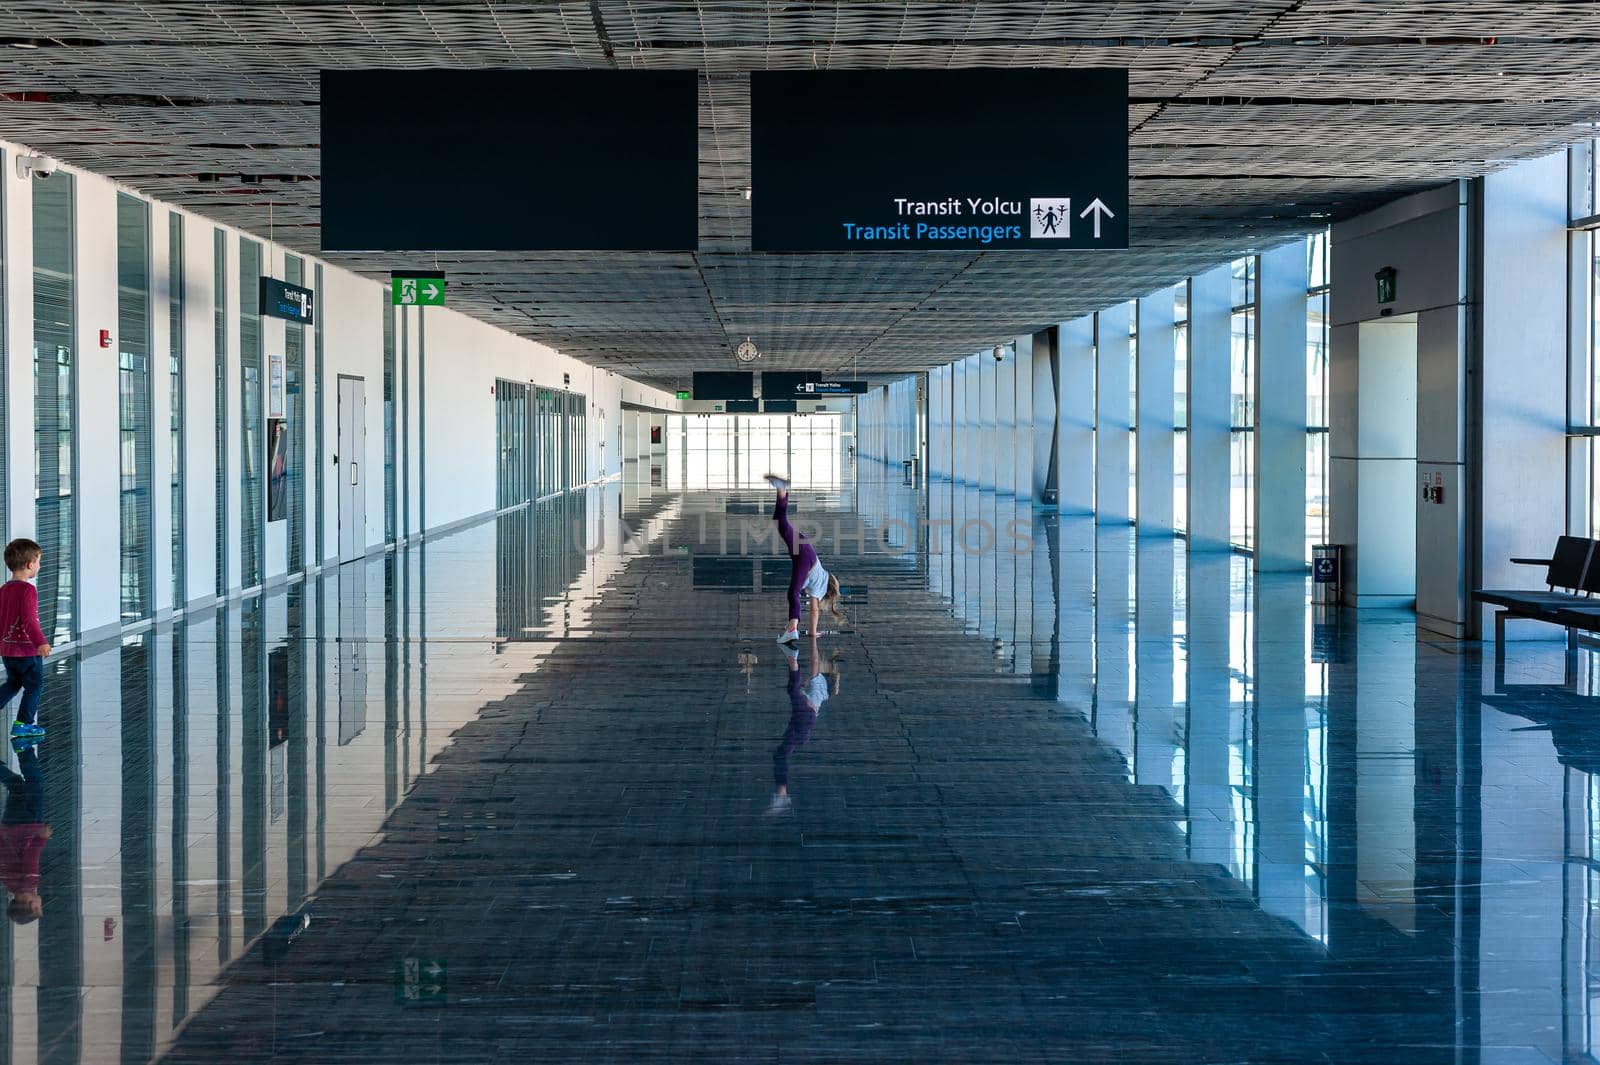 05/26/2019 Bodrum Airport / Milas Mugla Airport. Turkey. Small girl doing cartwheels exercise out of boredom while awaiting for her flight. by Qba